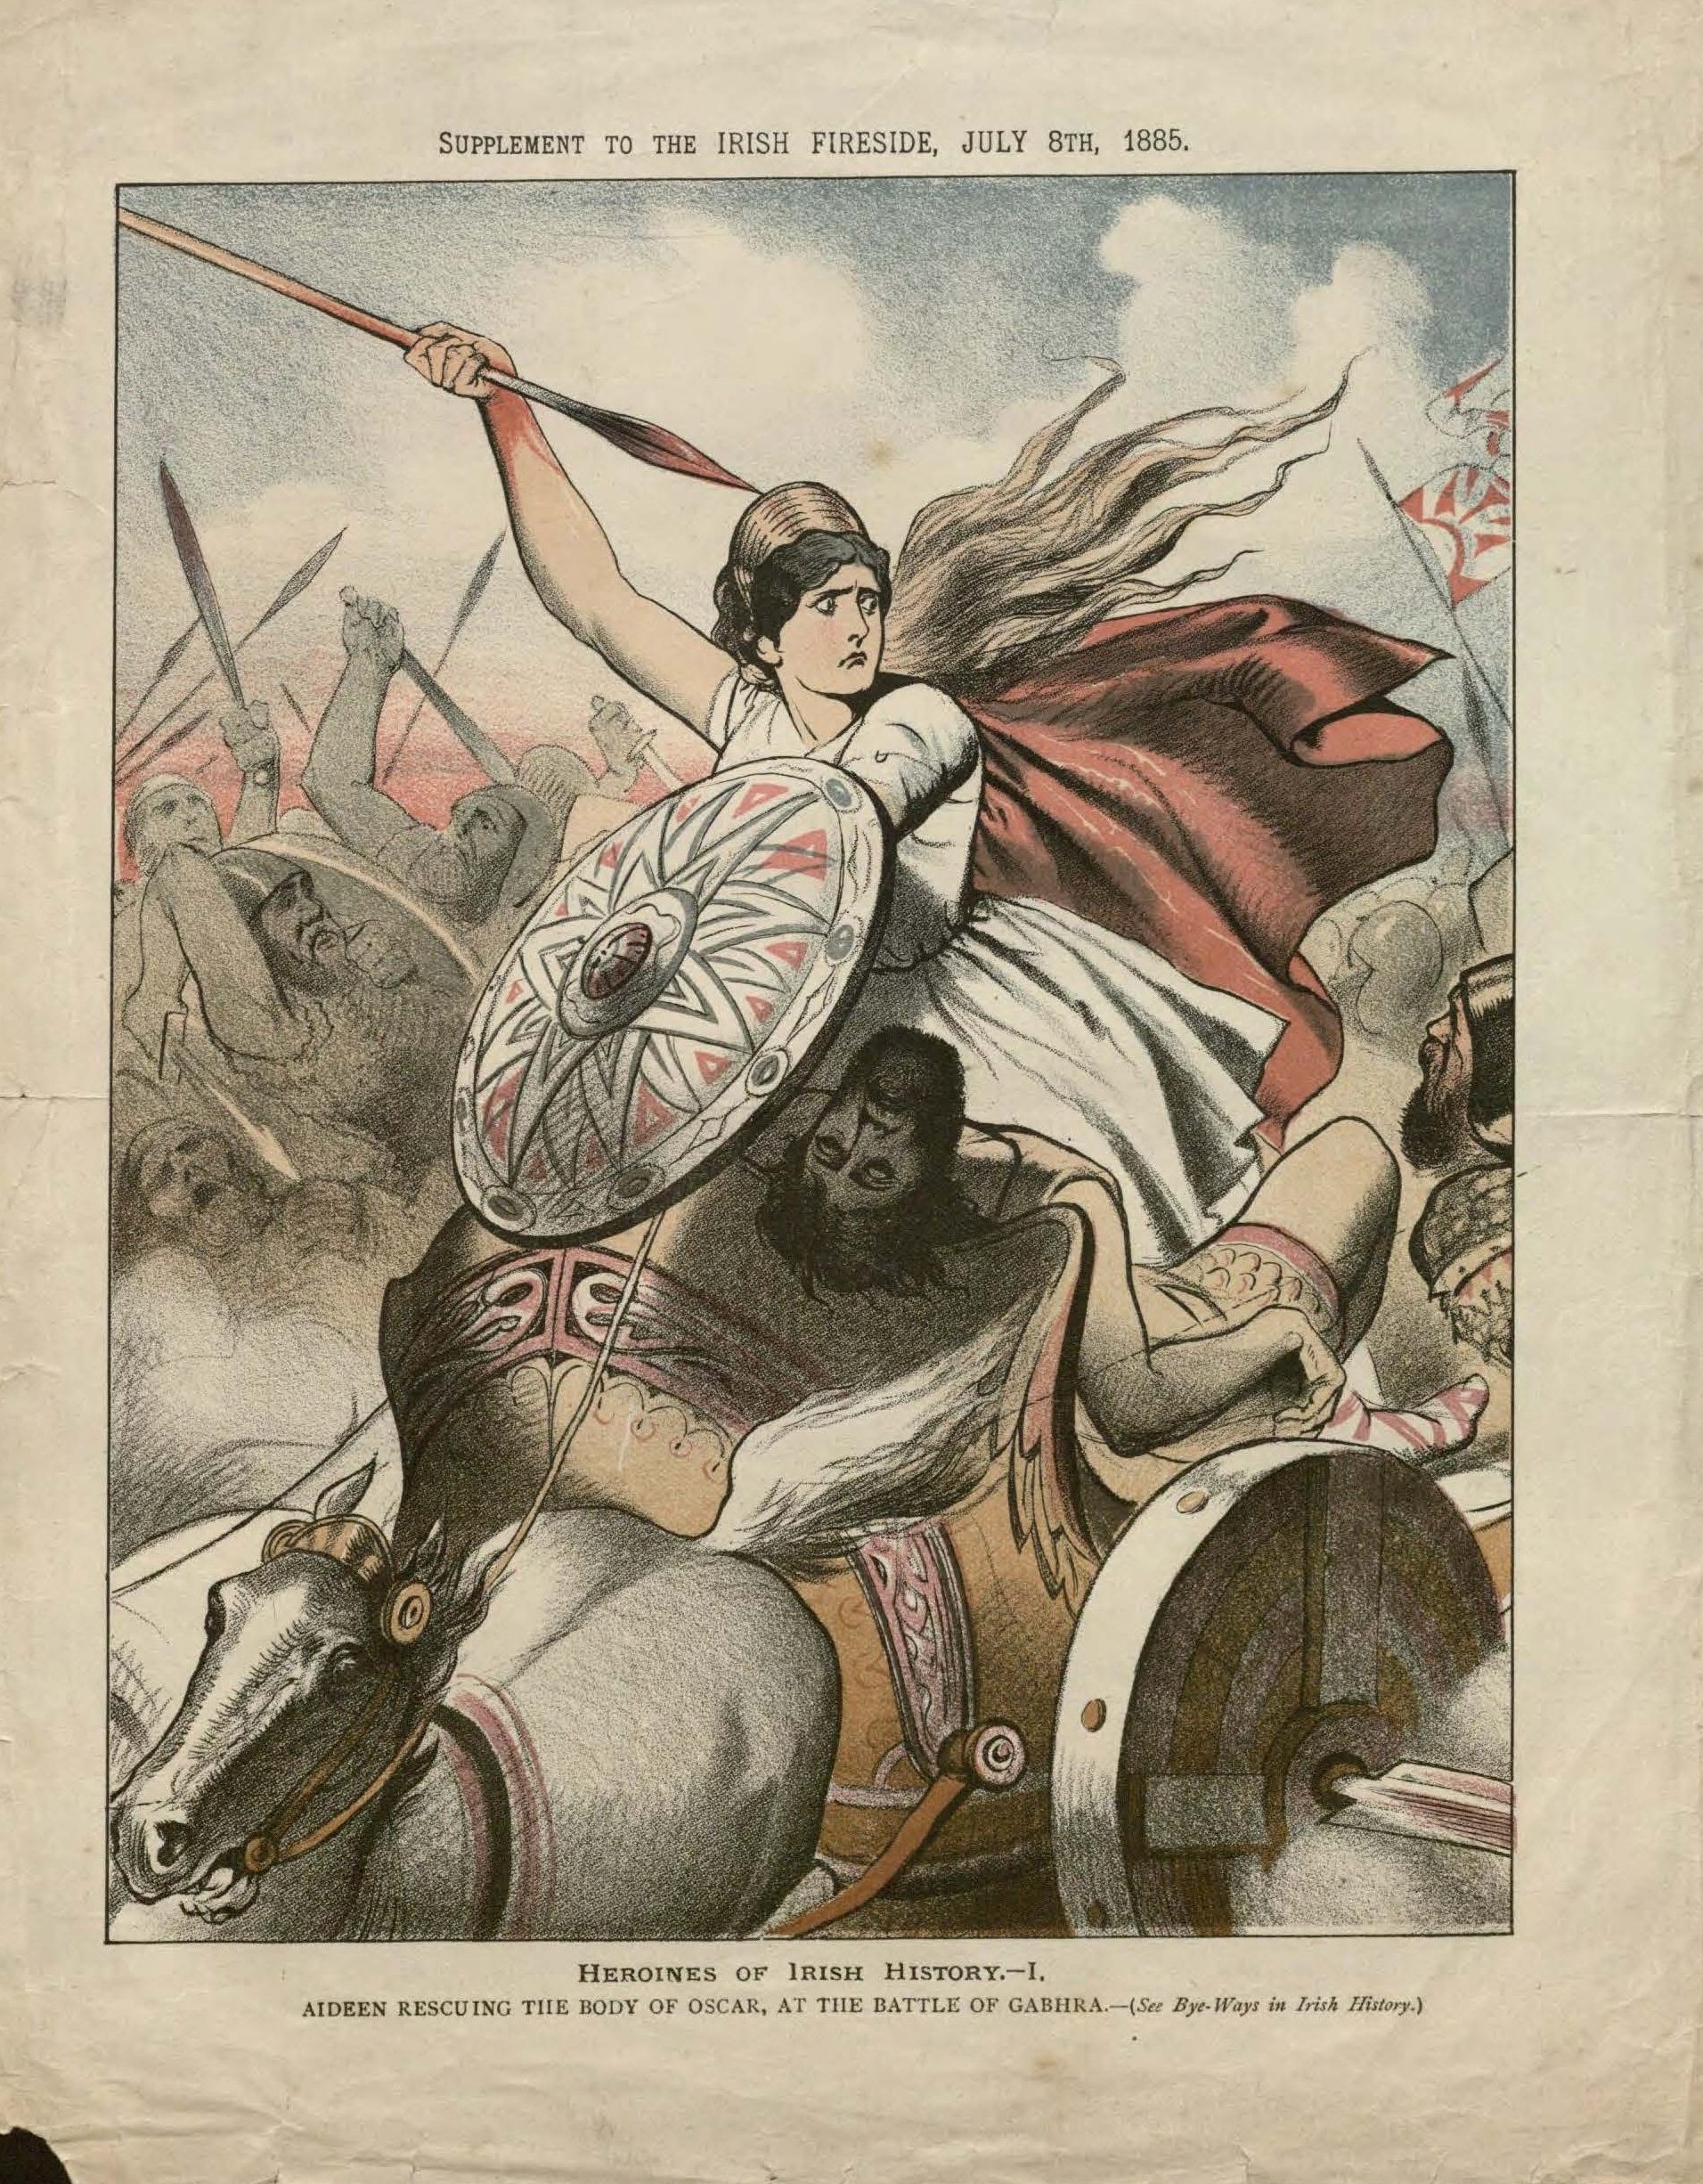 Image of Color Supplement from The Irish Fireside, Heroines of Irish History: Aideen, July 8, 1885